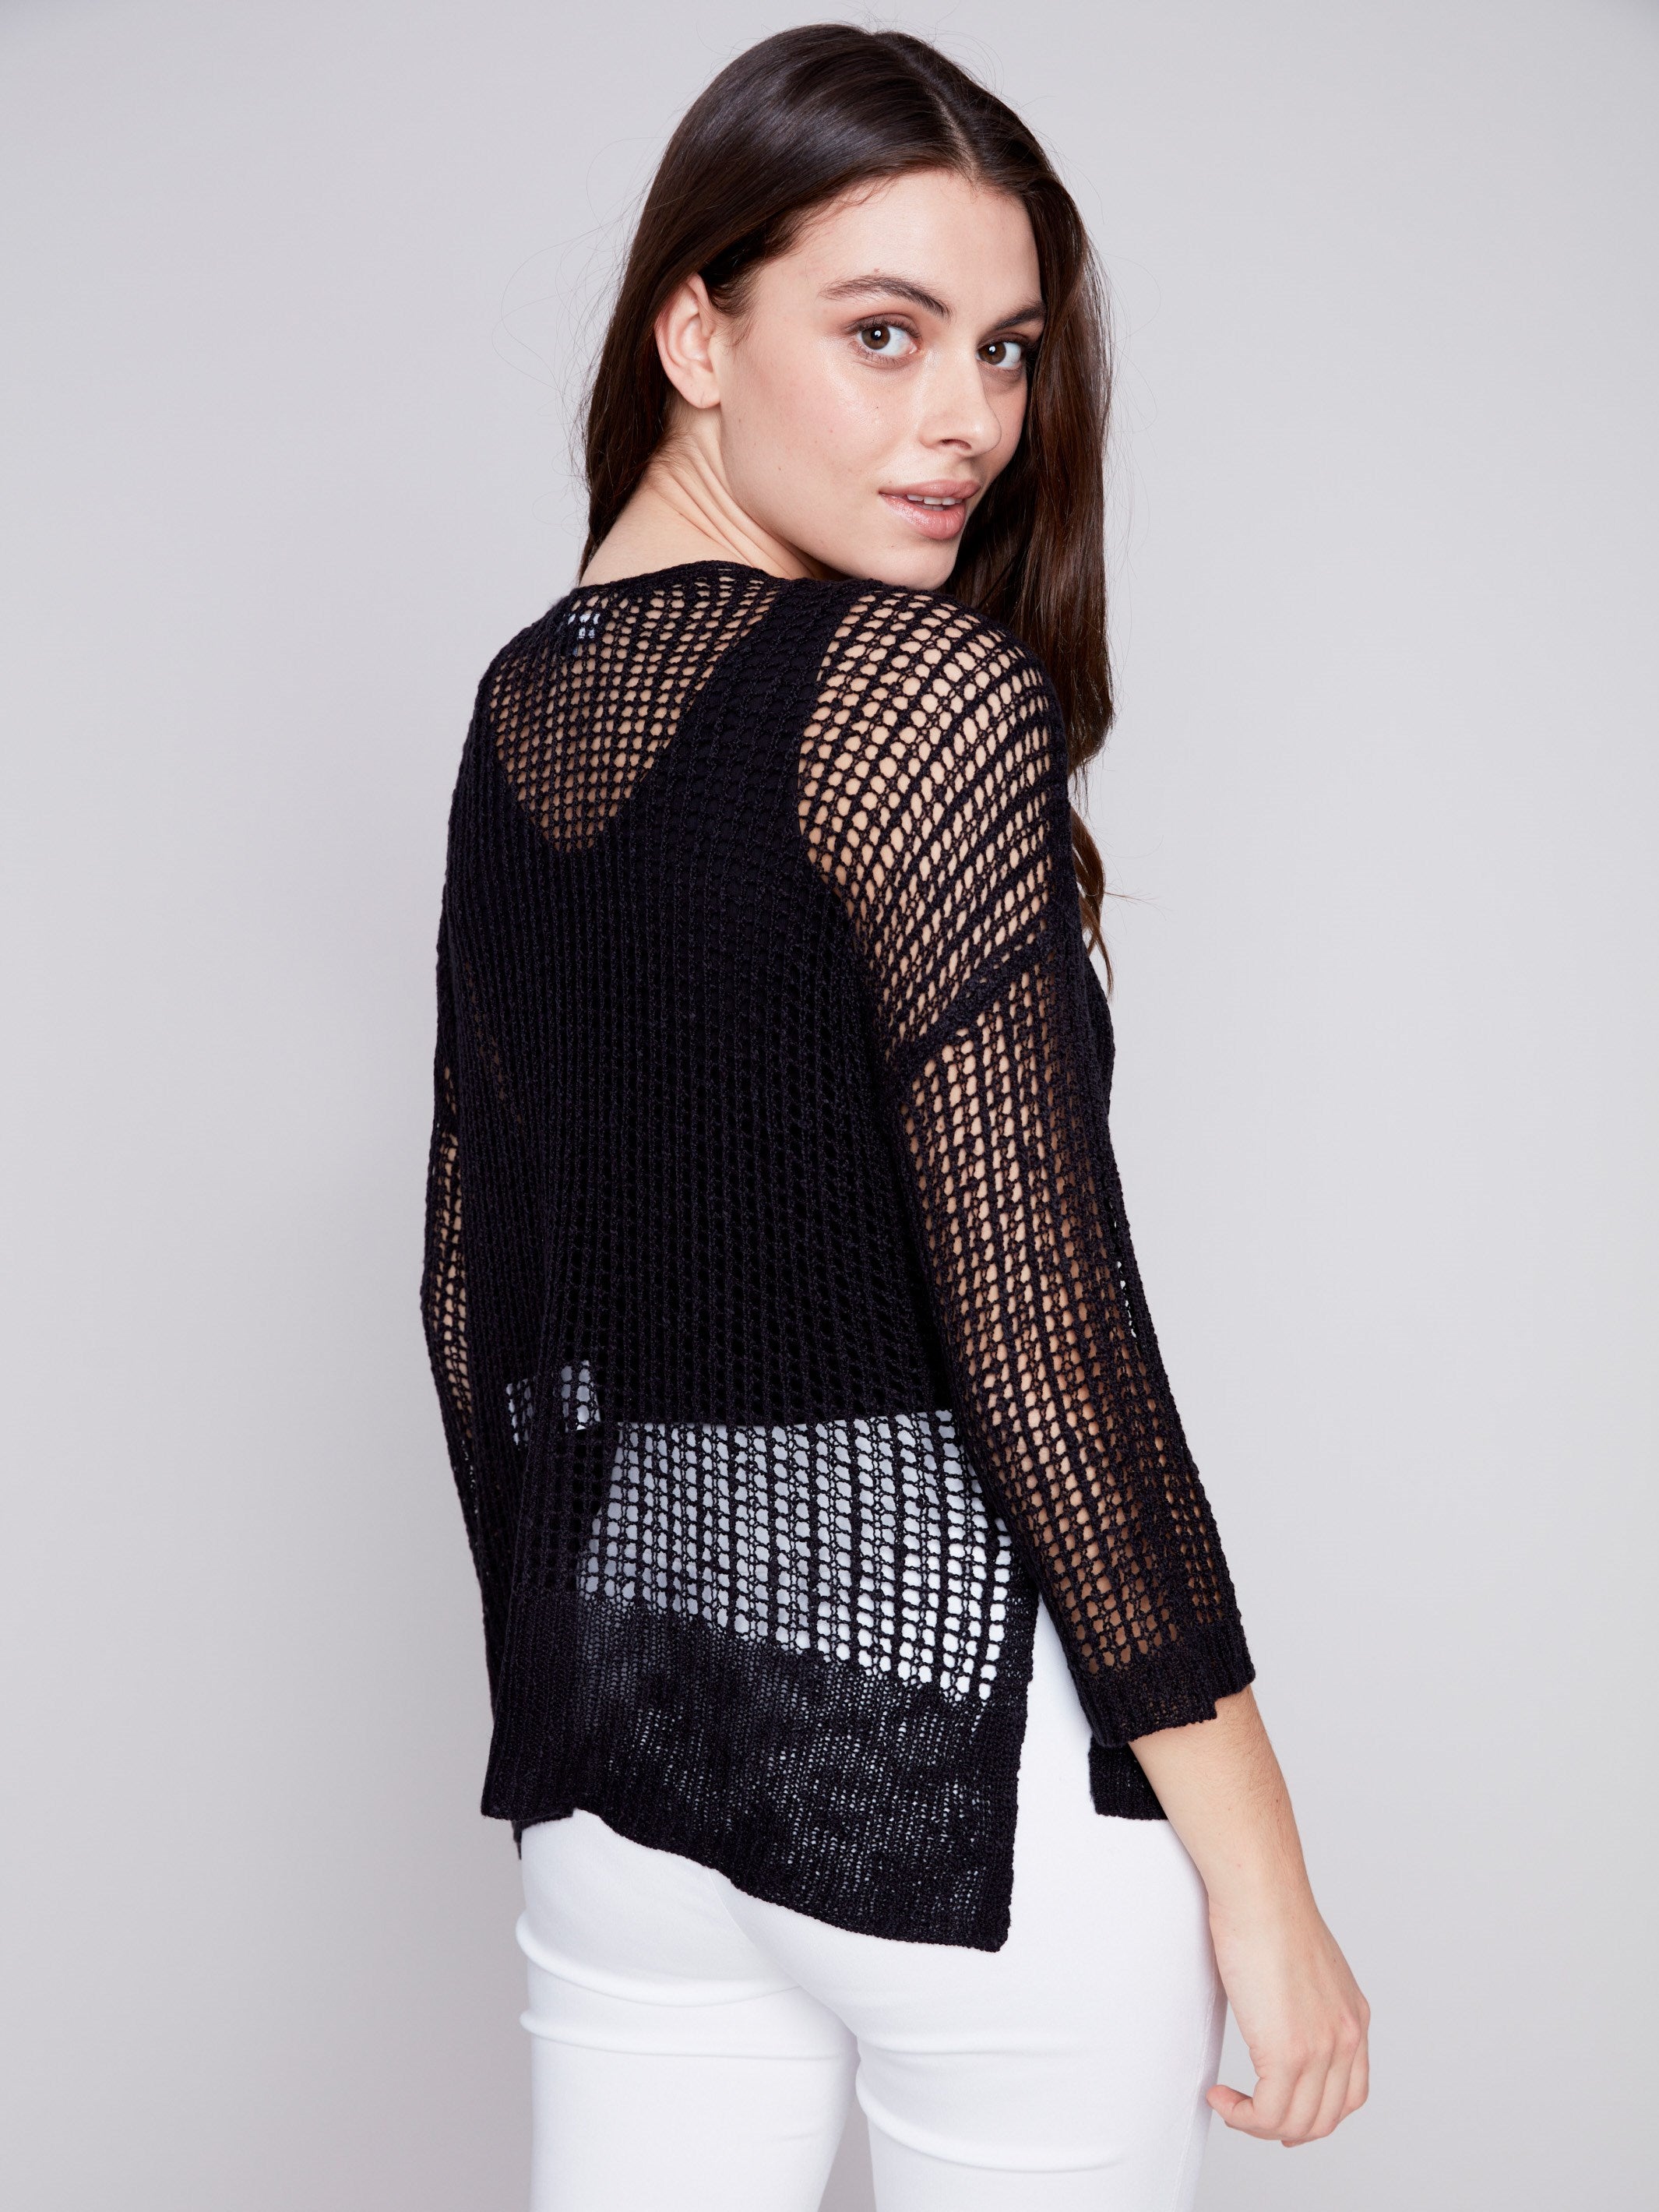 Fishnet Crochet Sweater - Black - Charlie B Collection Canada - Image 2